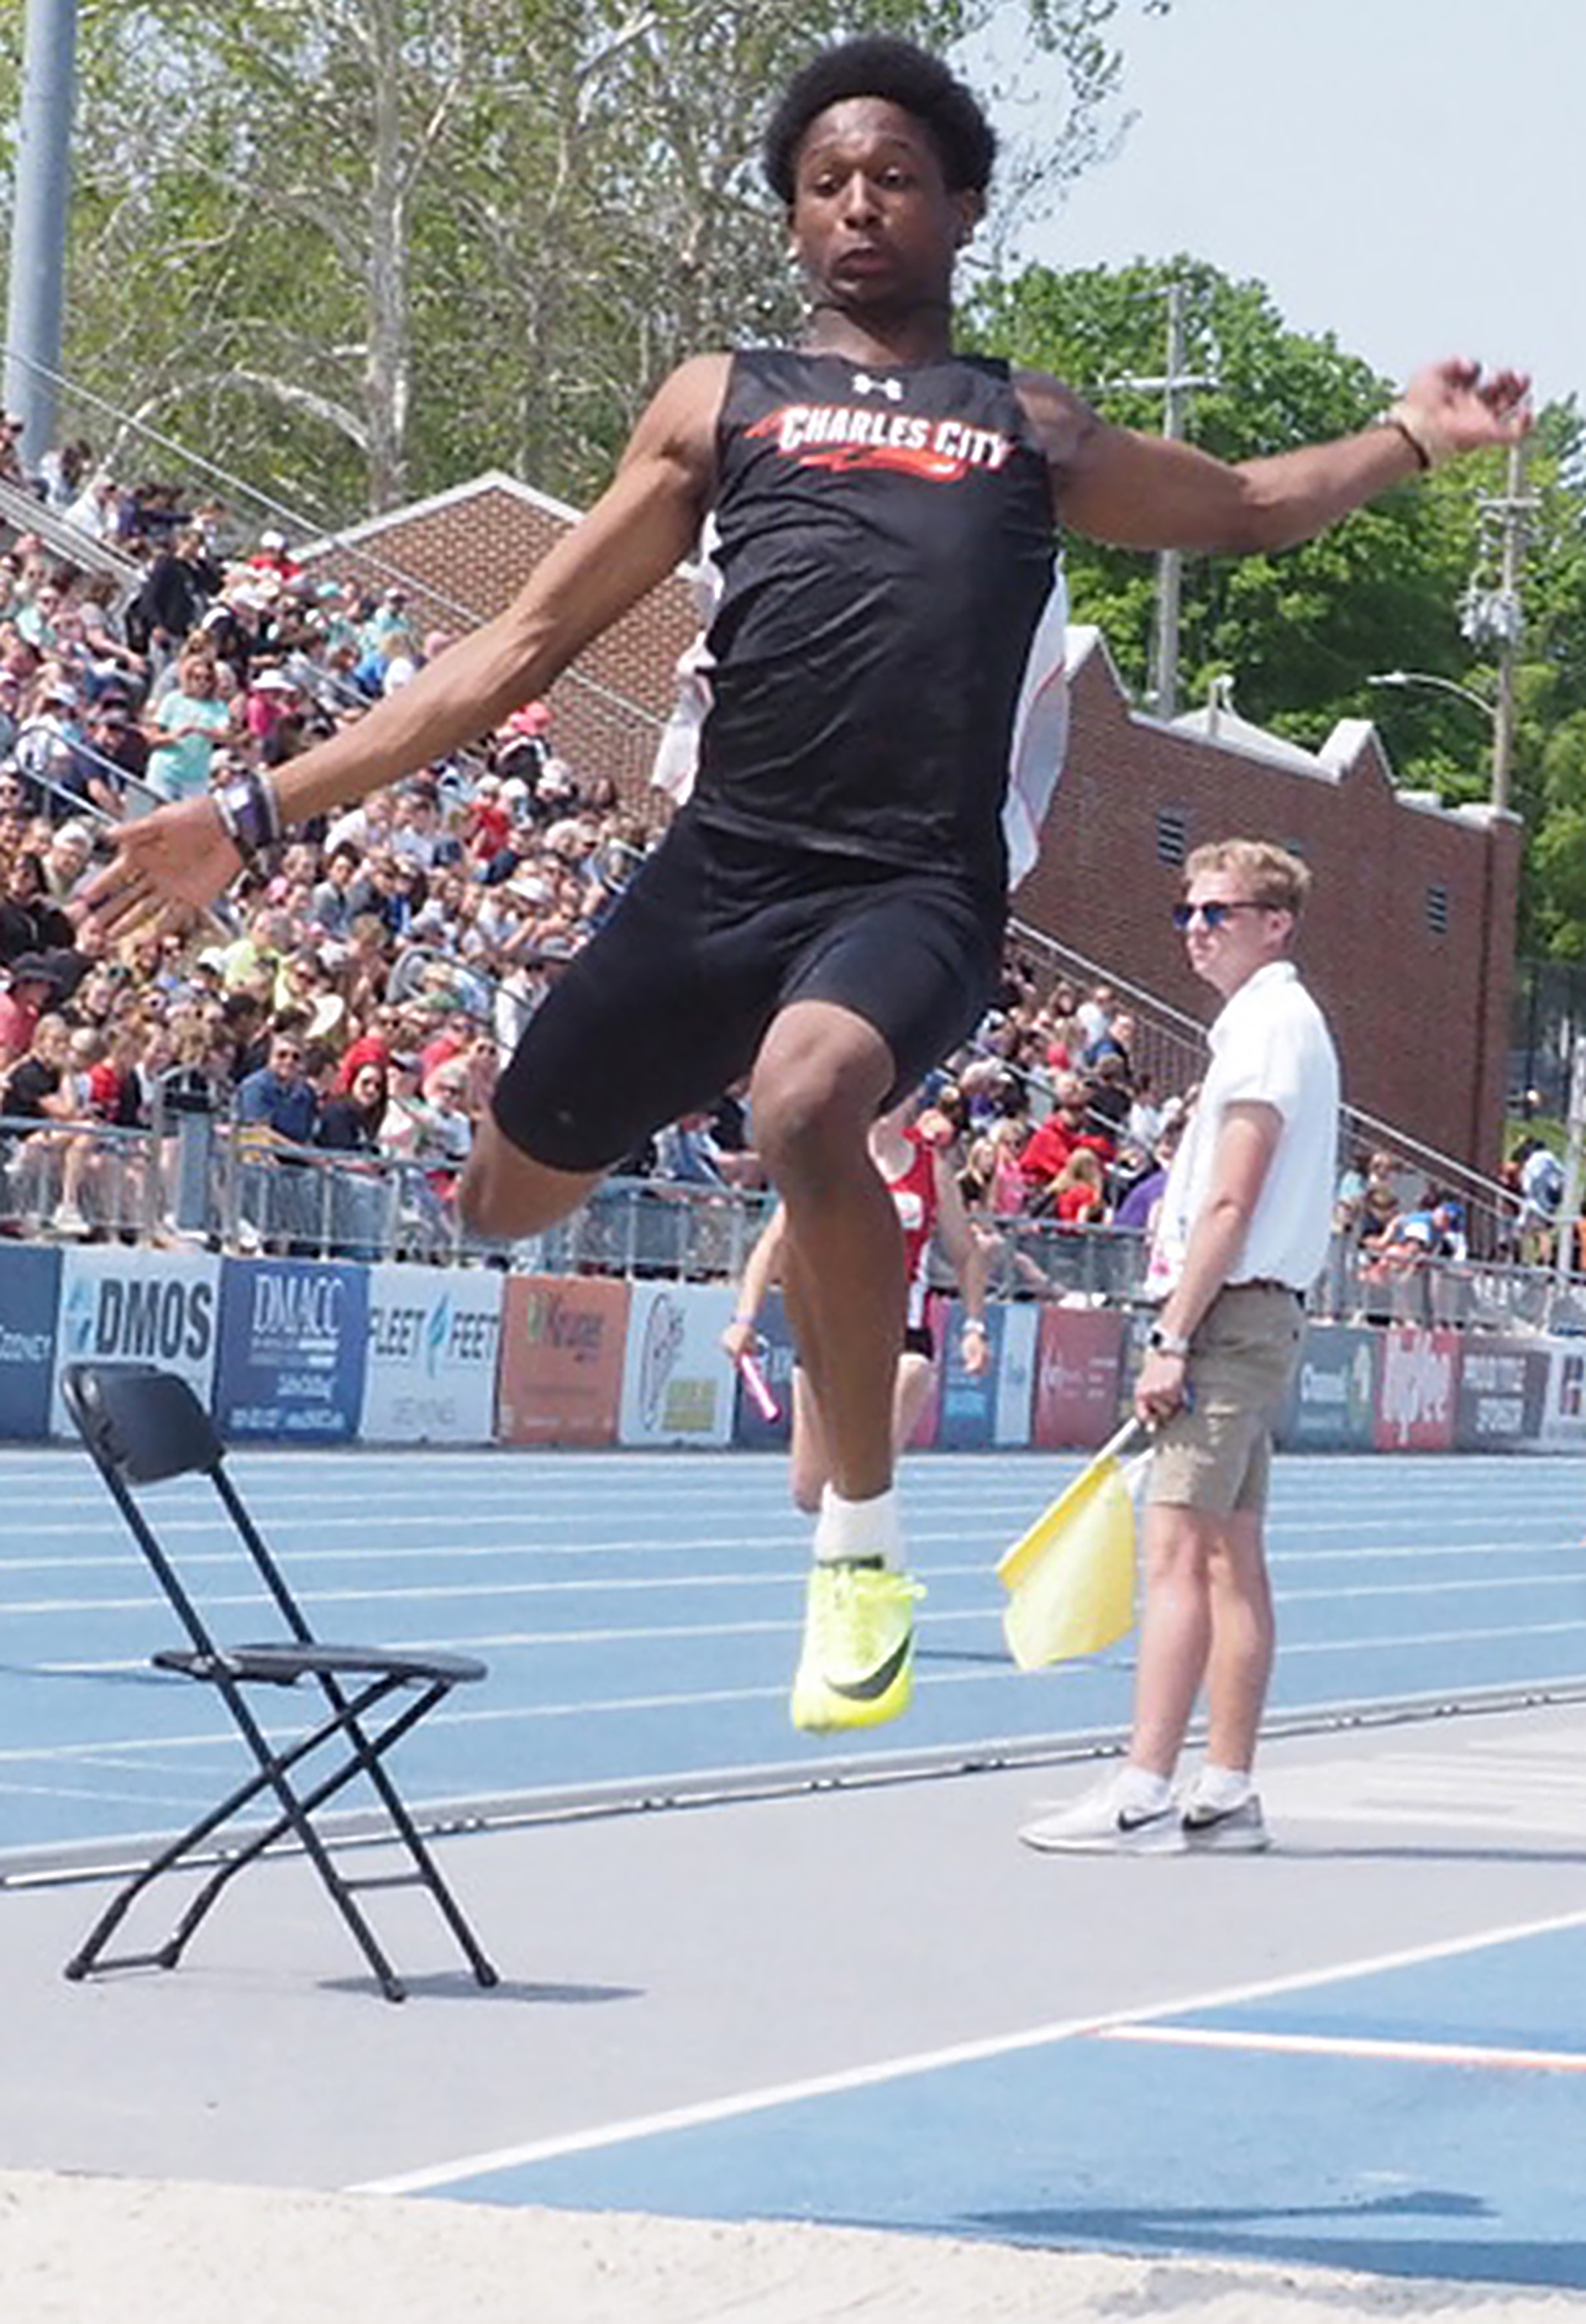 Josiah Cunnings leaps to state title in Class 3A boys long jump